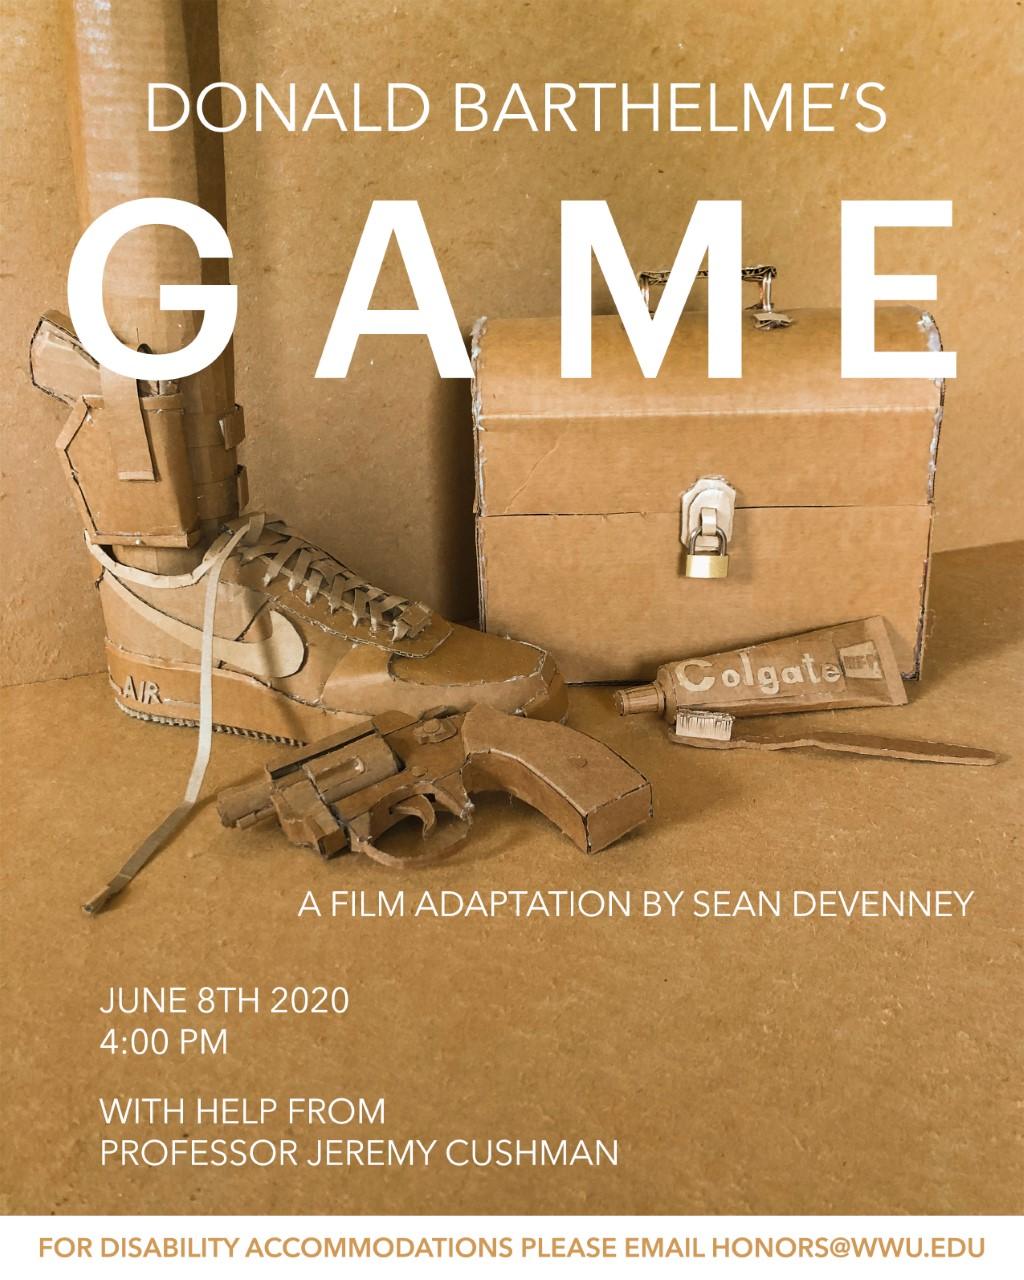 Image: Closeup of an arrangement of items constructed out of cardboard. Items shown are: A Nike Airforce 1 with a leg coming out of it, an ankle holster on said leg with a firearm in it, a tube of toothpaste, a toothbrush, a revolver and a lunchbox. Text: "Donald Barthelme's Game. A Film adaptation by Sean Devenney. June 8th 2020, 4:00 PM. With help from professor Jeremy Cushman. For disability accommodations please email honors@wwu.edu."